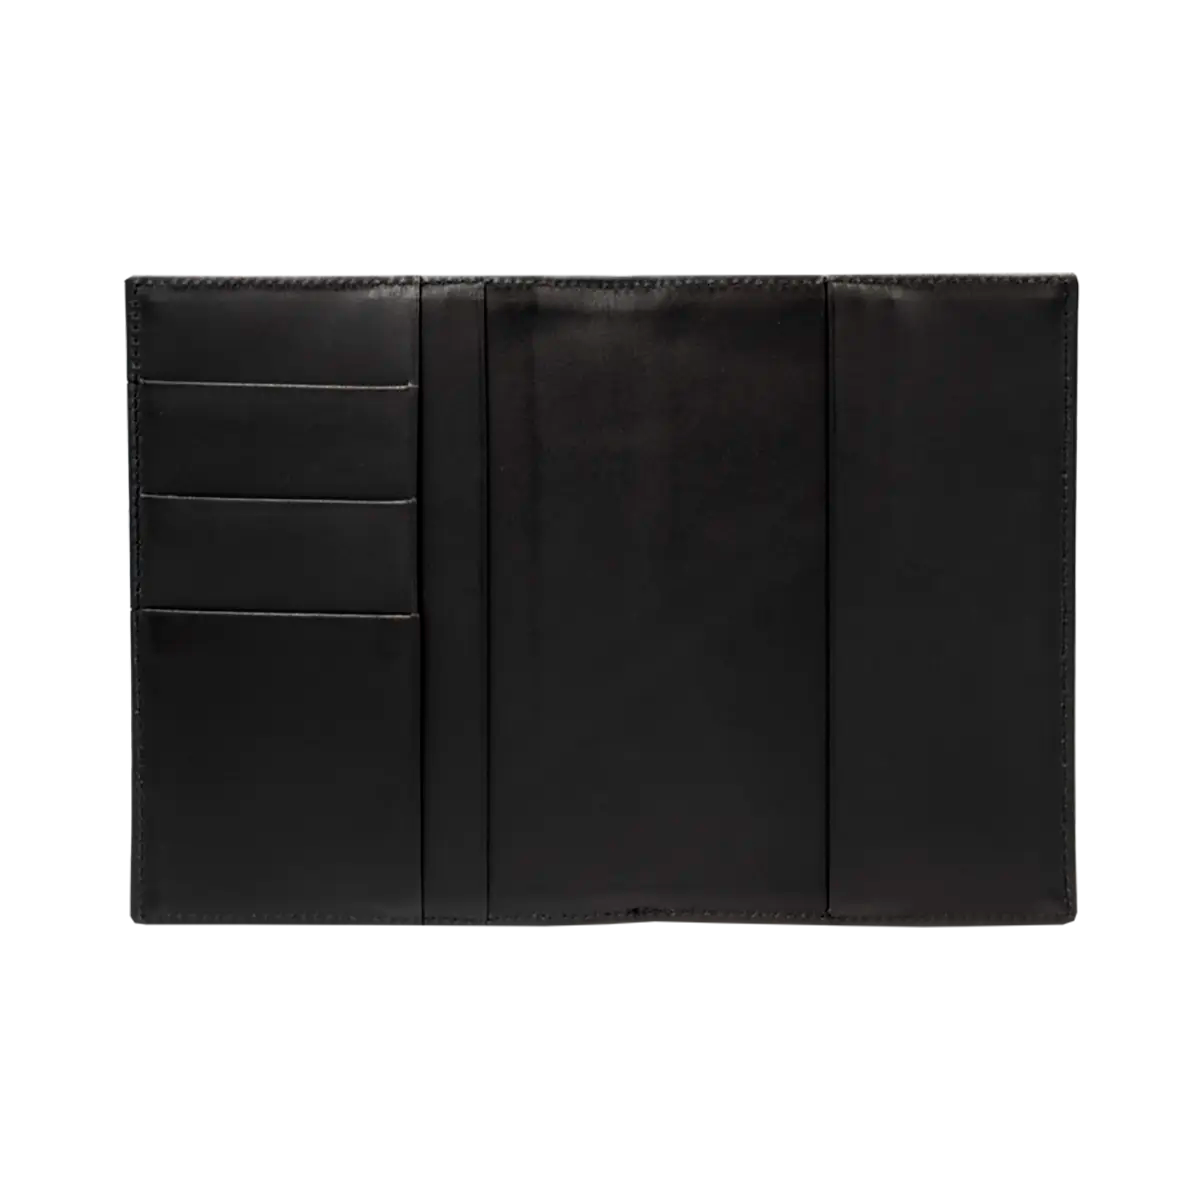 black leather passport holder with detail print. Fashion travel accessory for women. Shop in San Diego, CA.